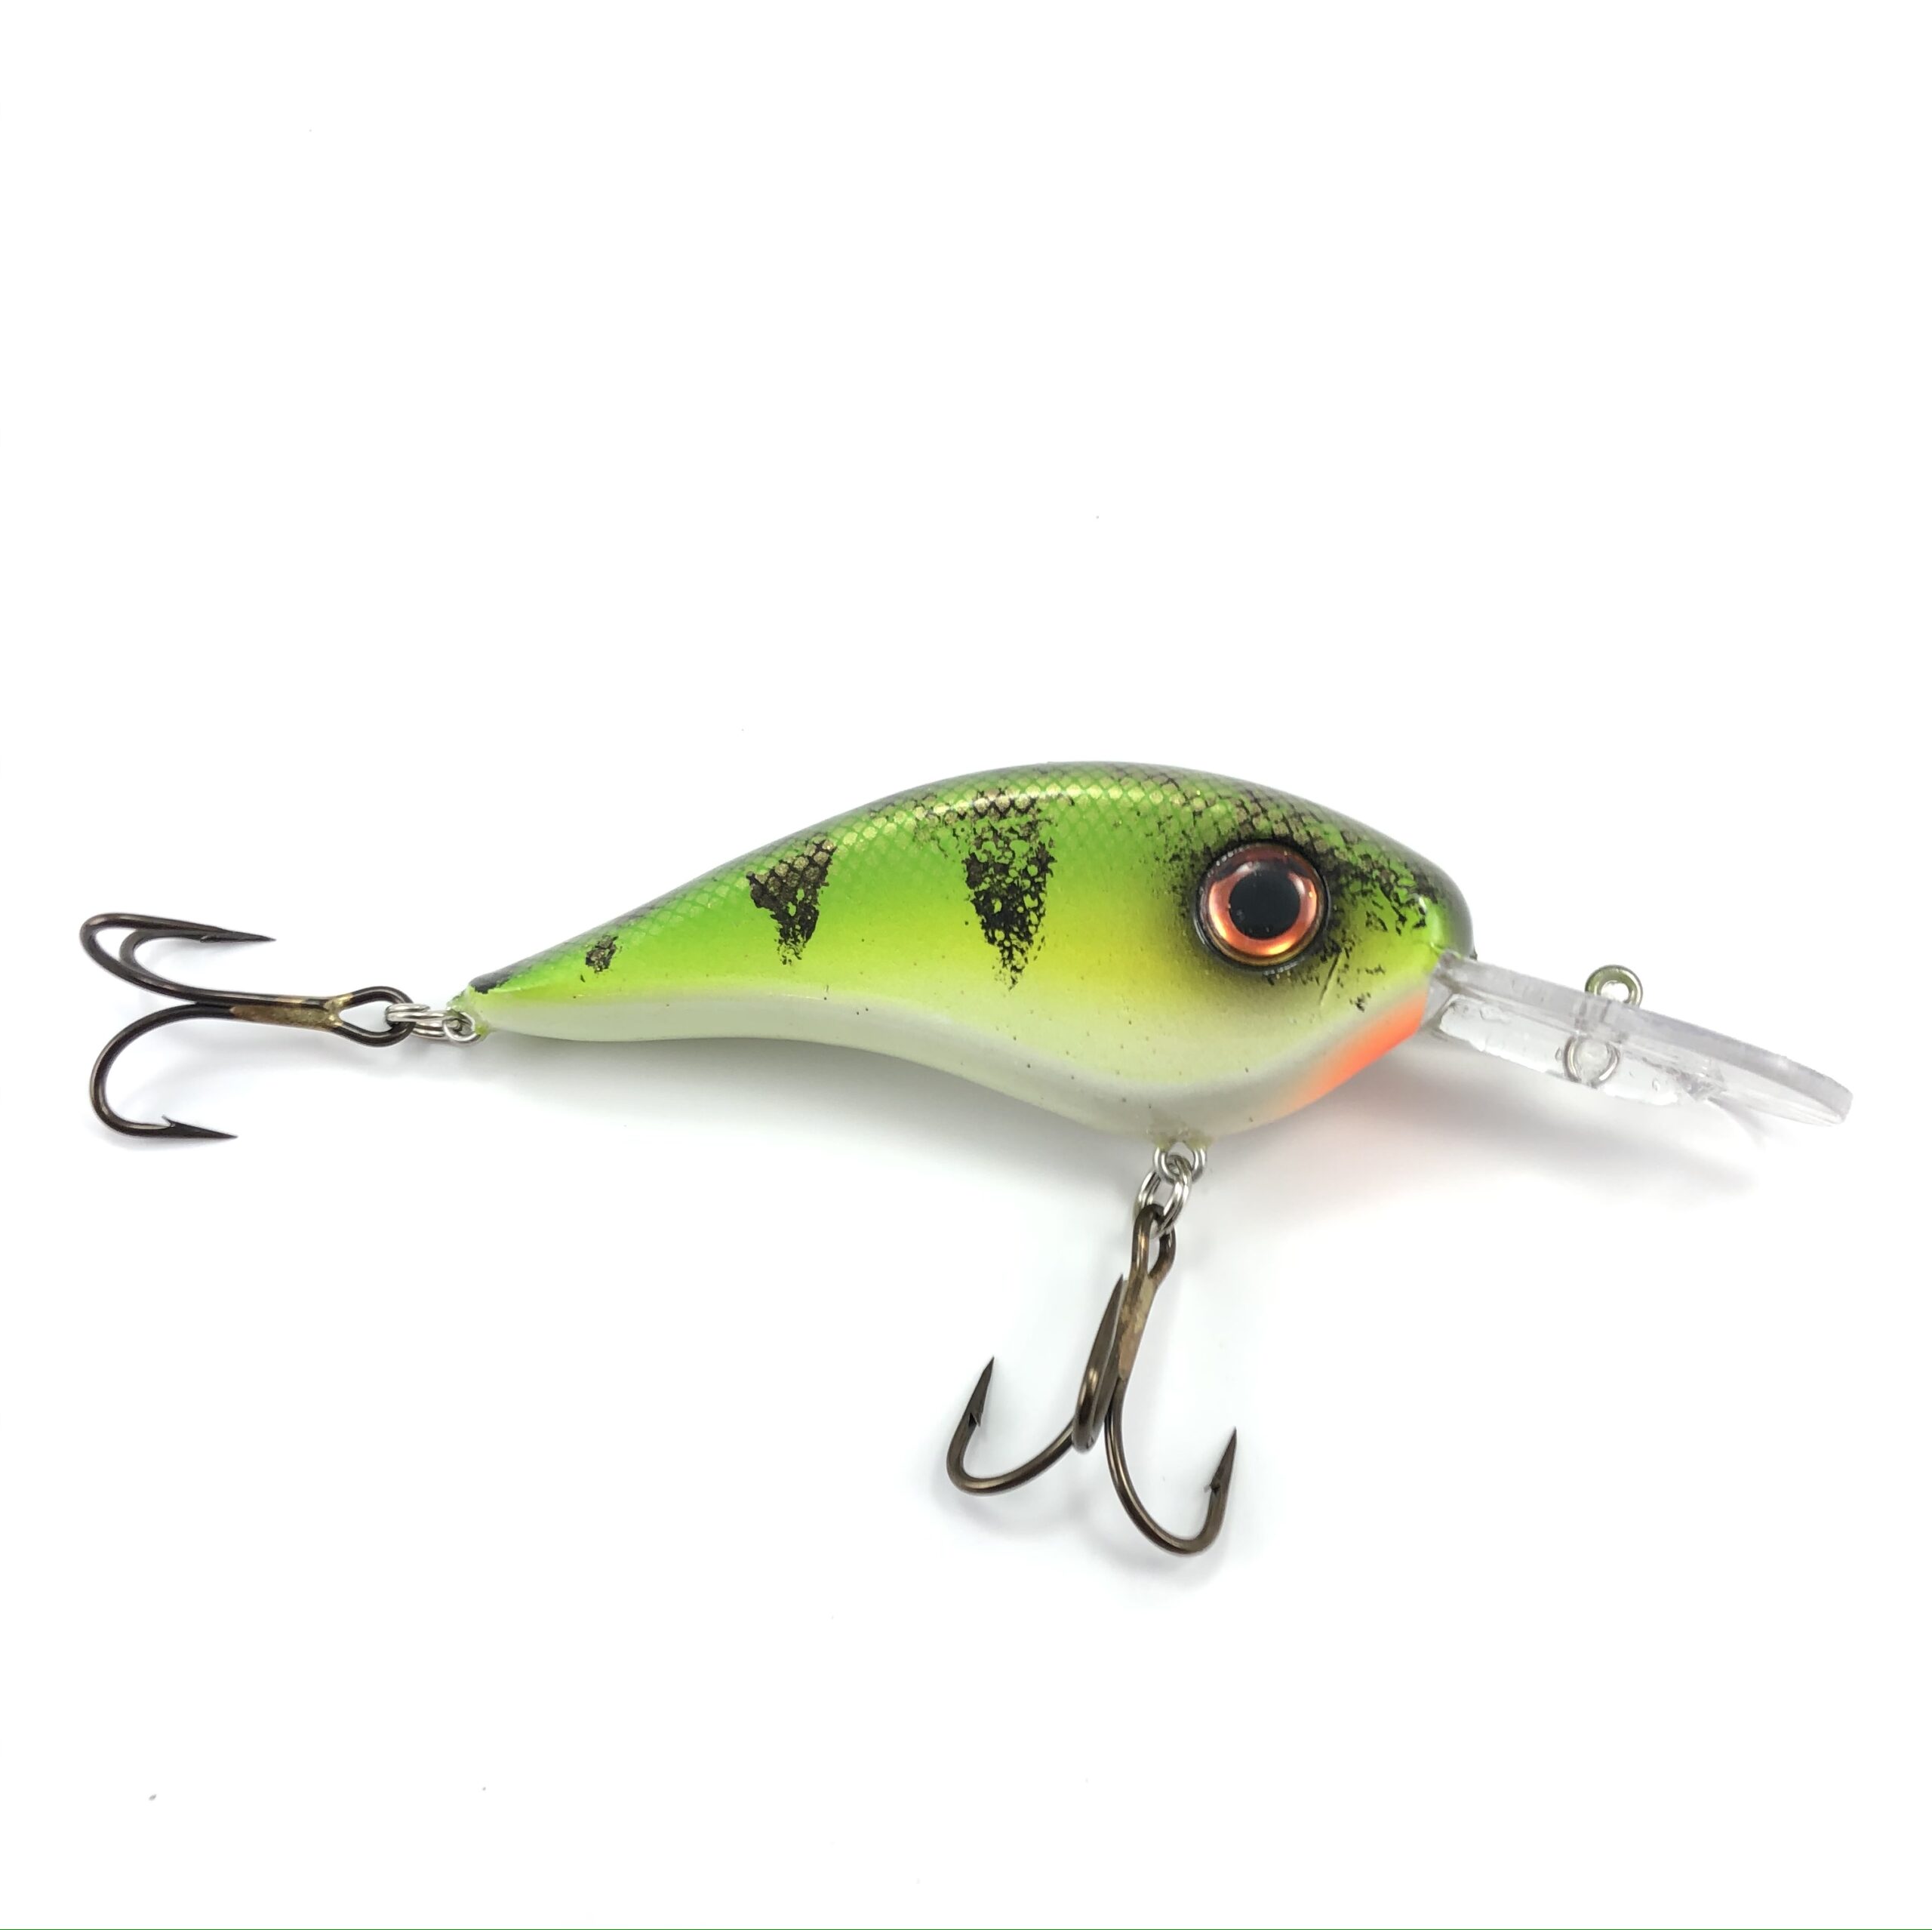 https://www.llungenlures.com/wp-content/uploads/Photo-Aug-01-8-17-38-PM-scaled.jpg